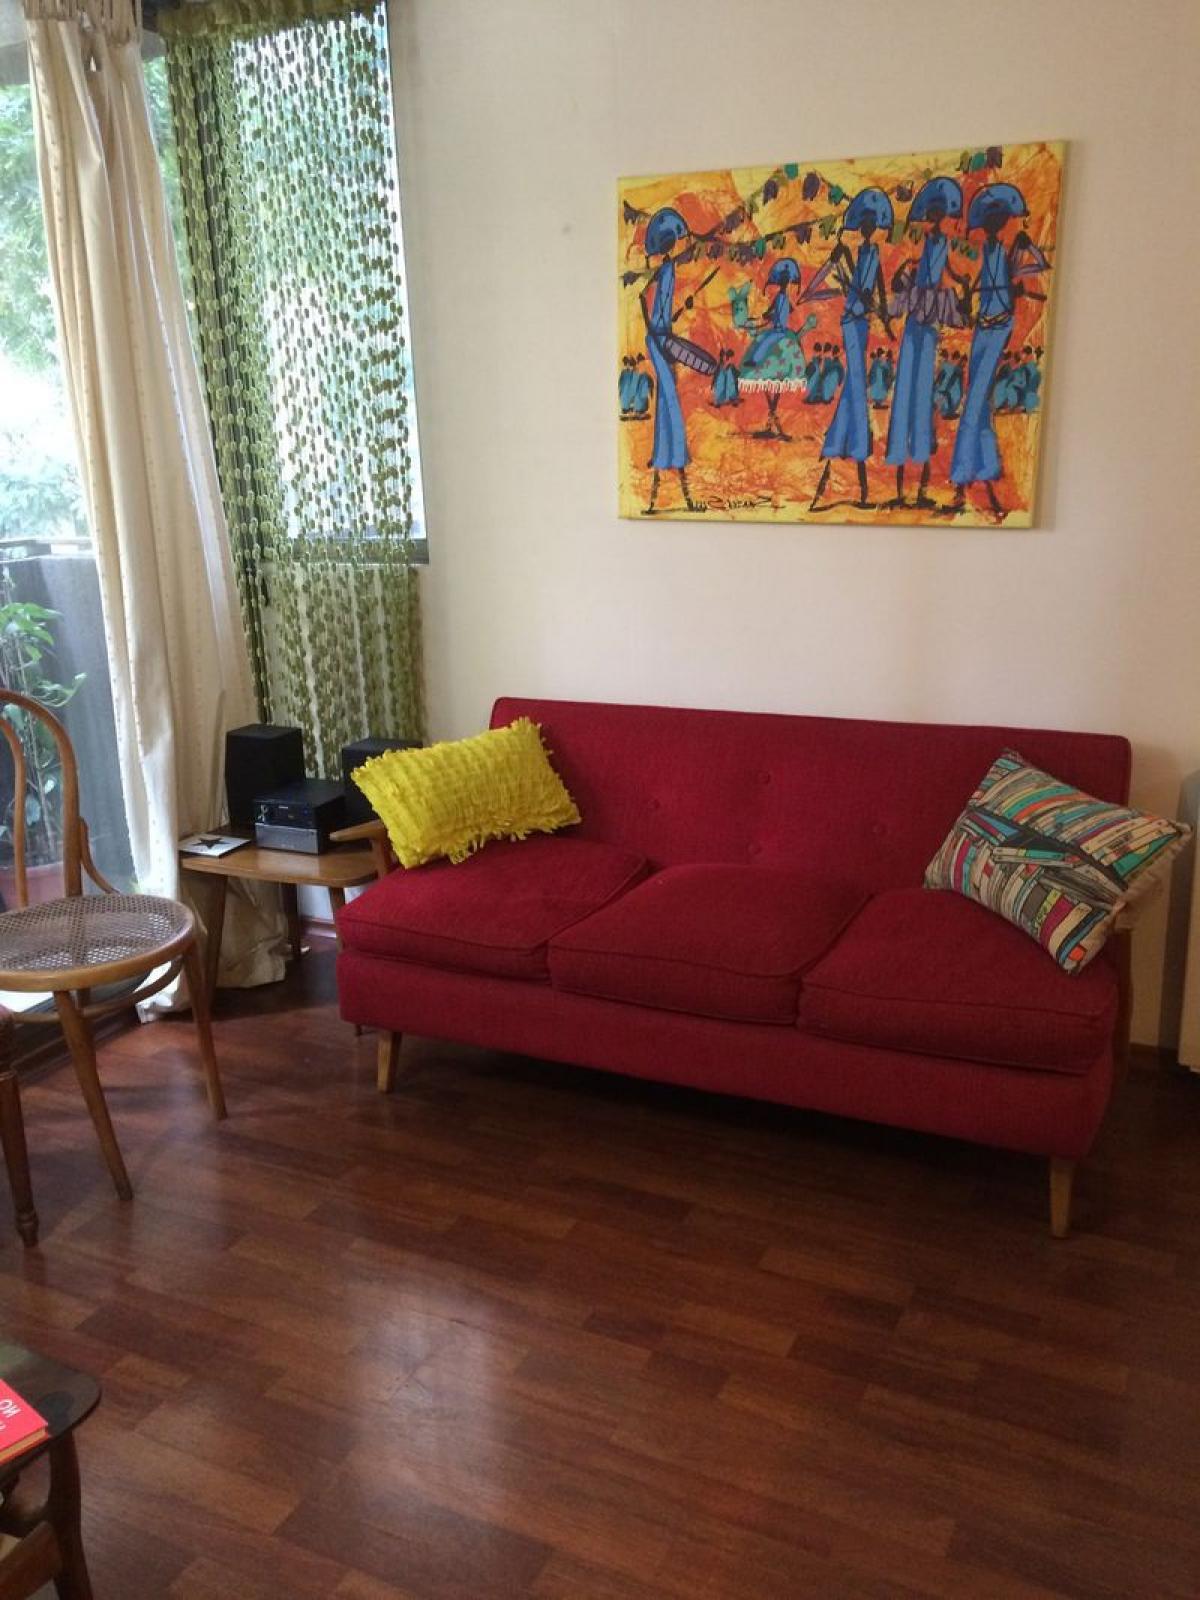 Picture of Apartment For Sale in Region Metropolitana, Region Metropolitana
, Chile